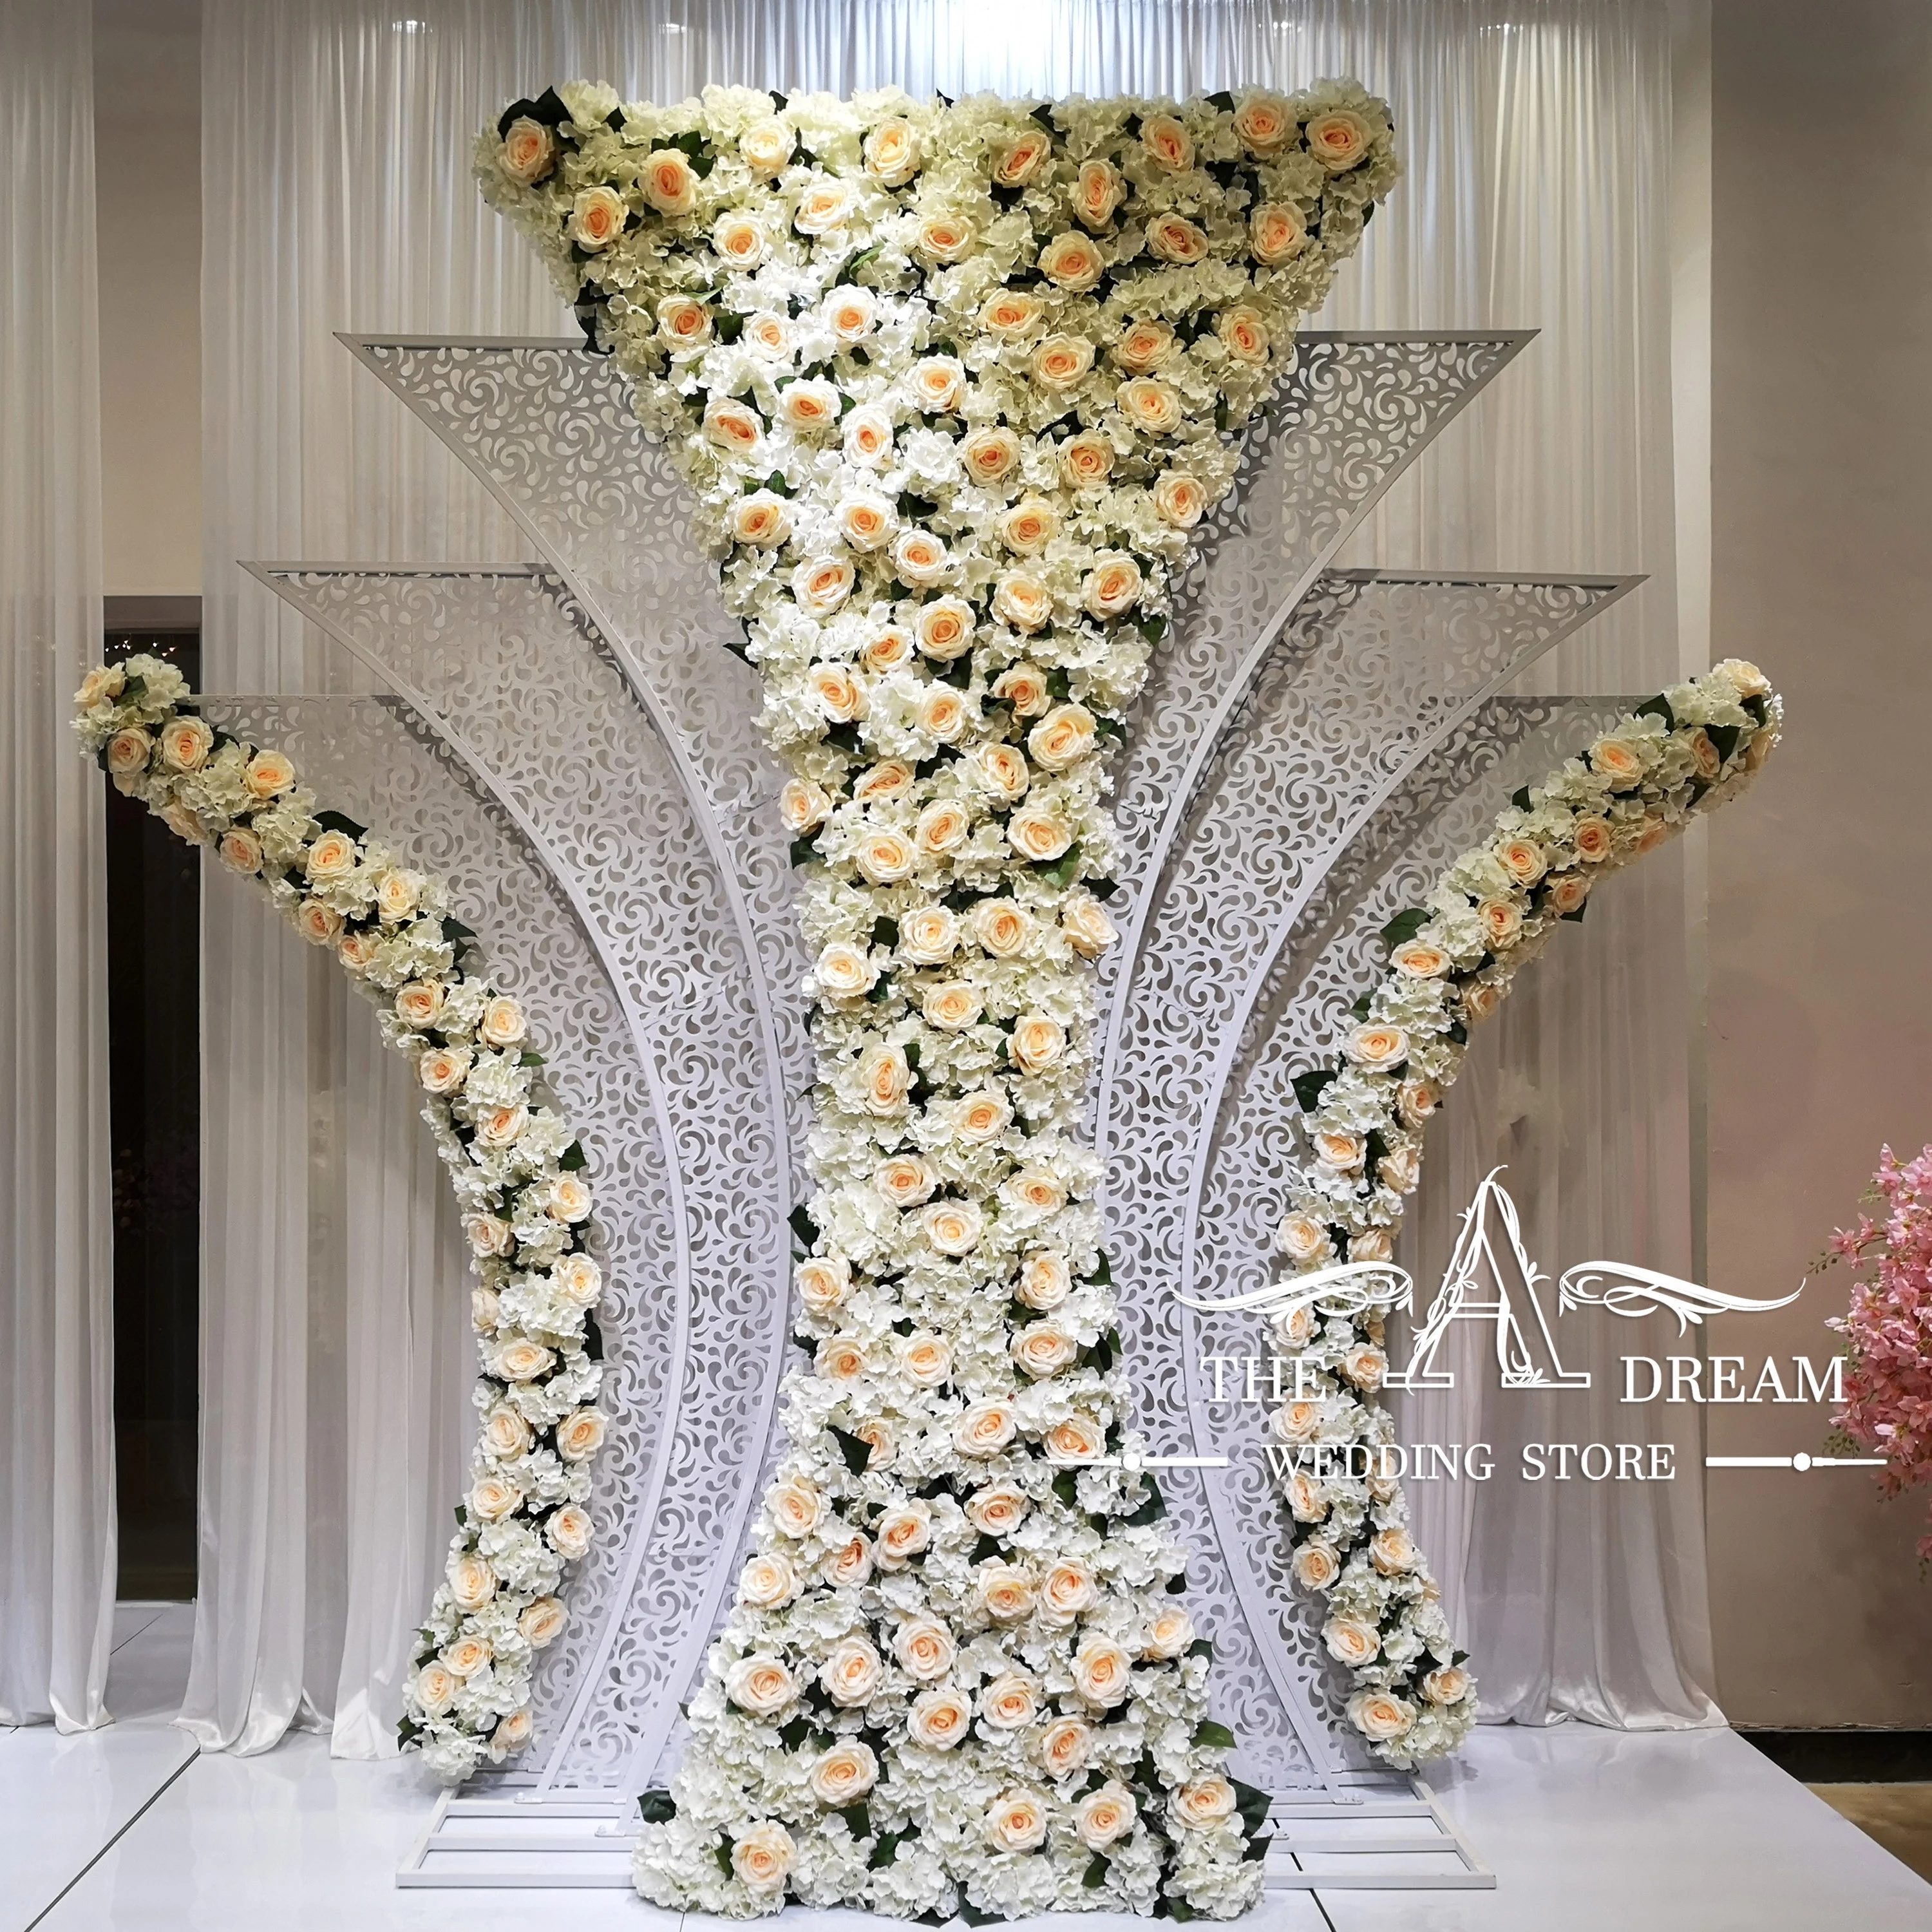 White Metal Backdrop Trending Wedding Backdrop New Wedding Decoration  For Event Stage From The A Dream Wedding Store